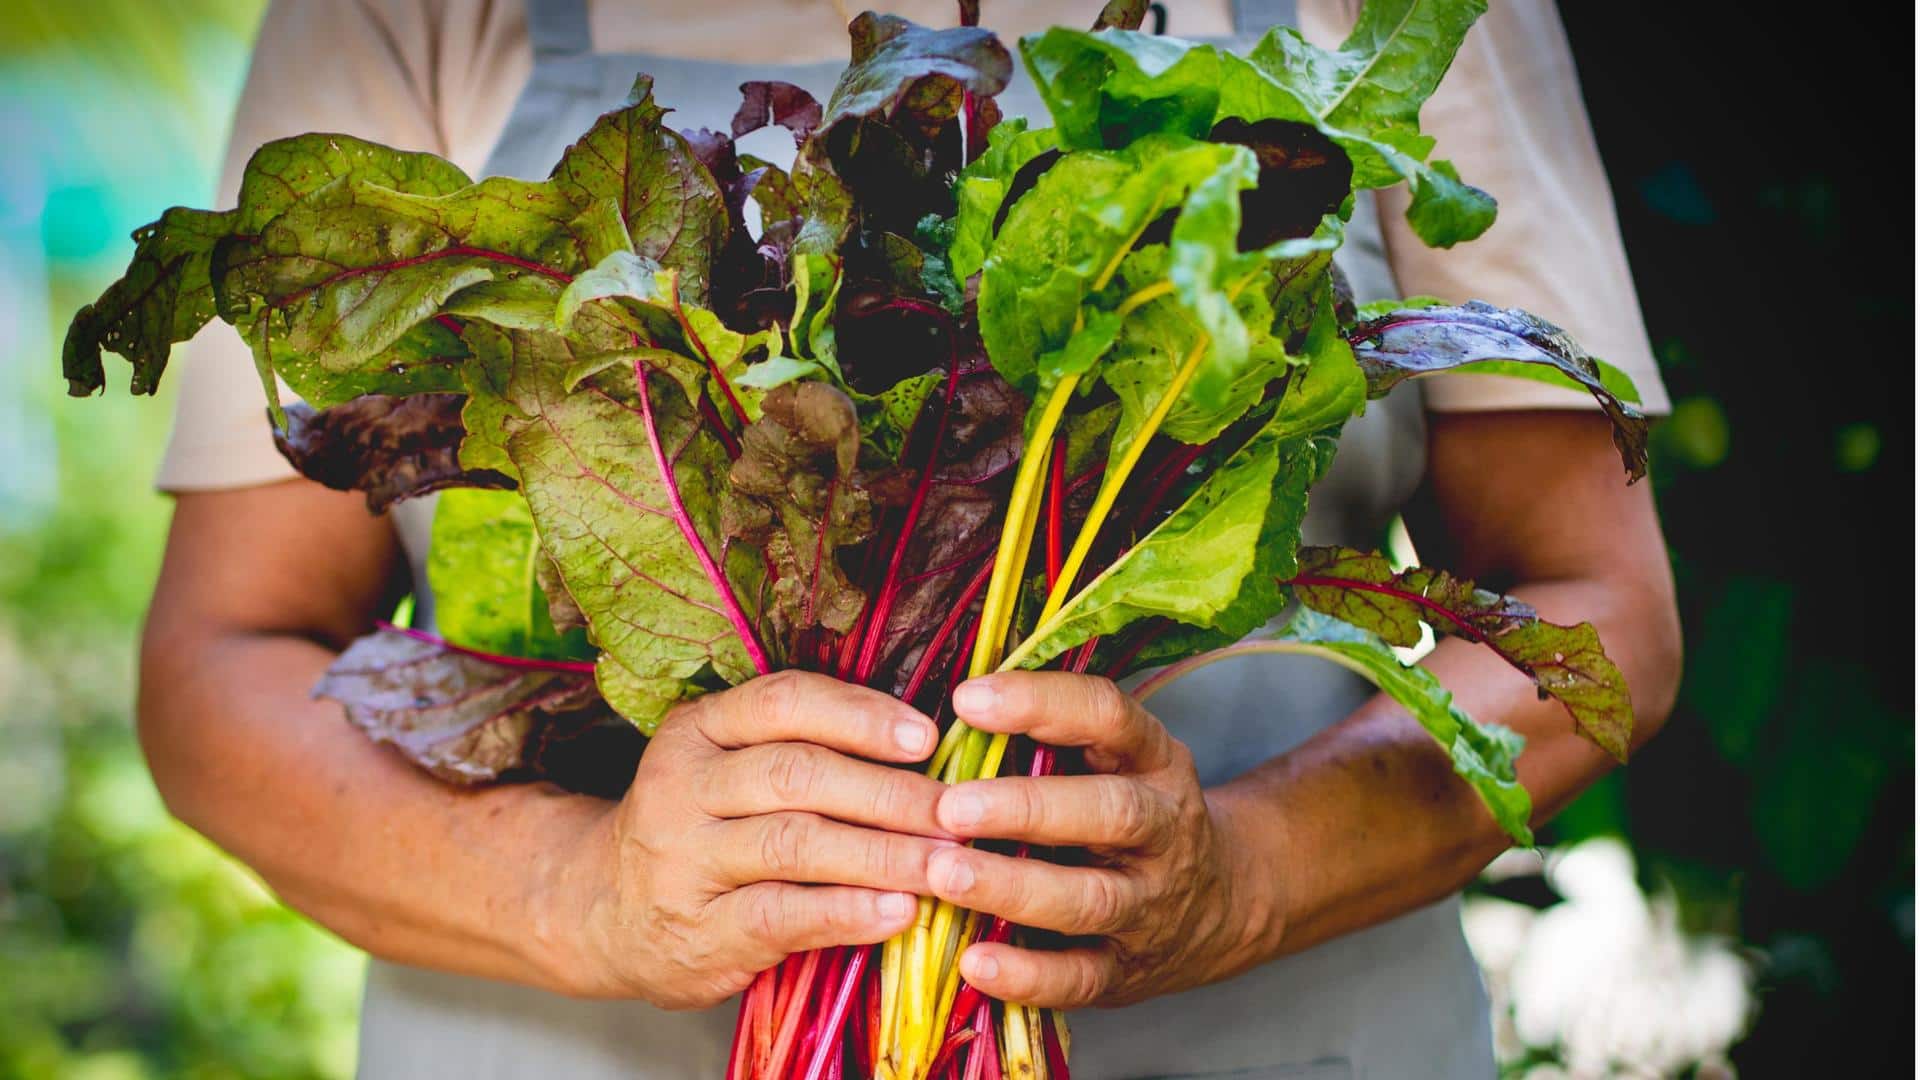 Reasons why Swiss chard deserves a spot on your plate